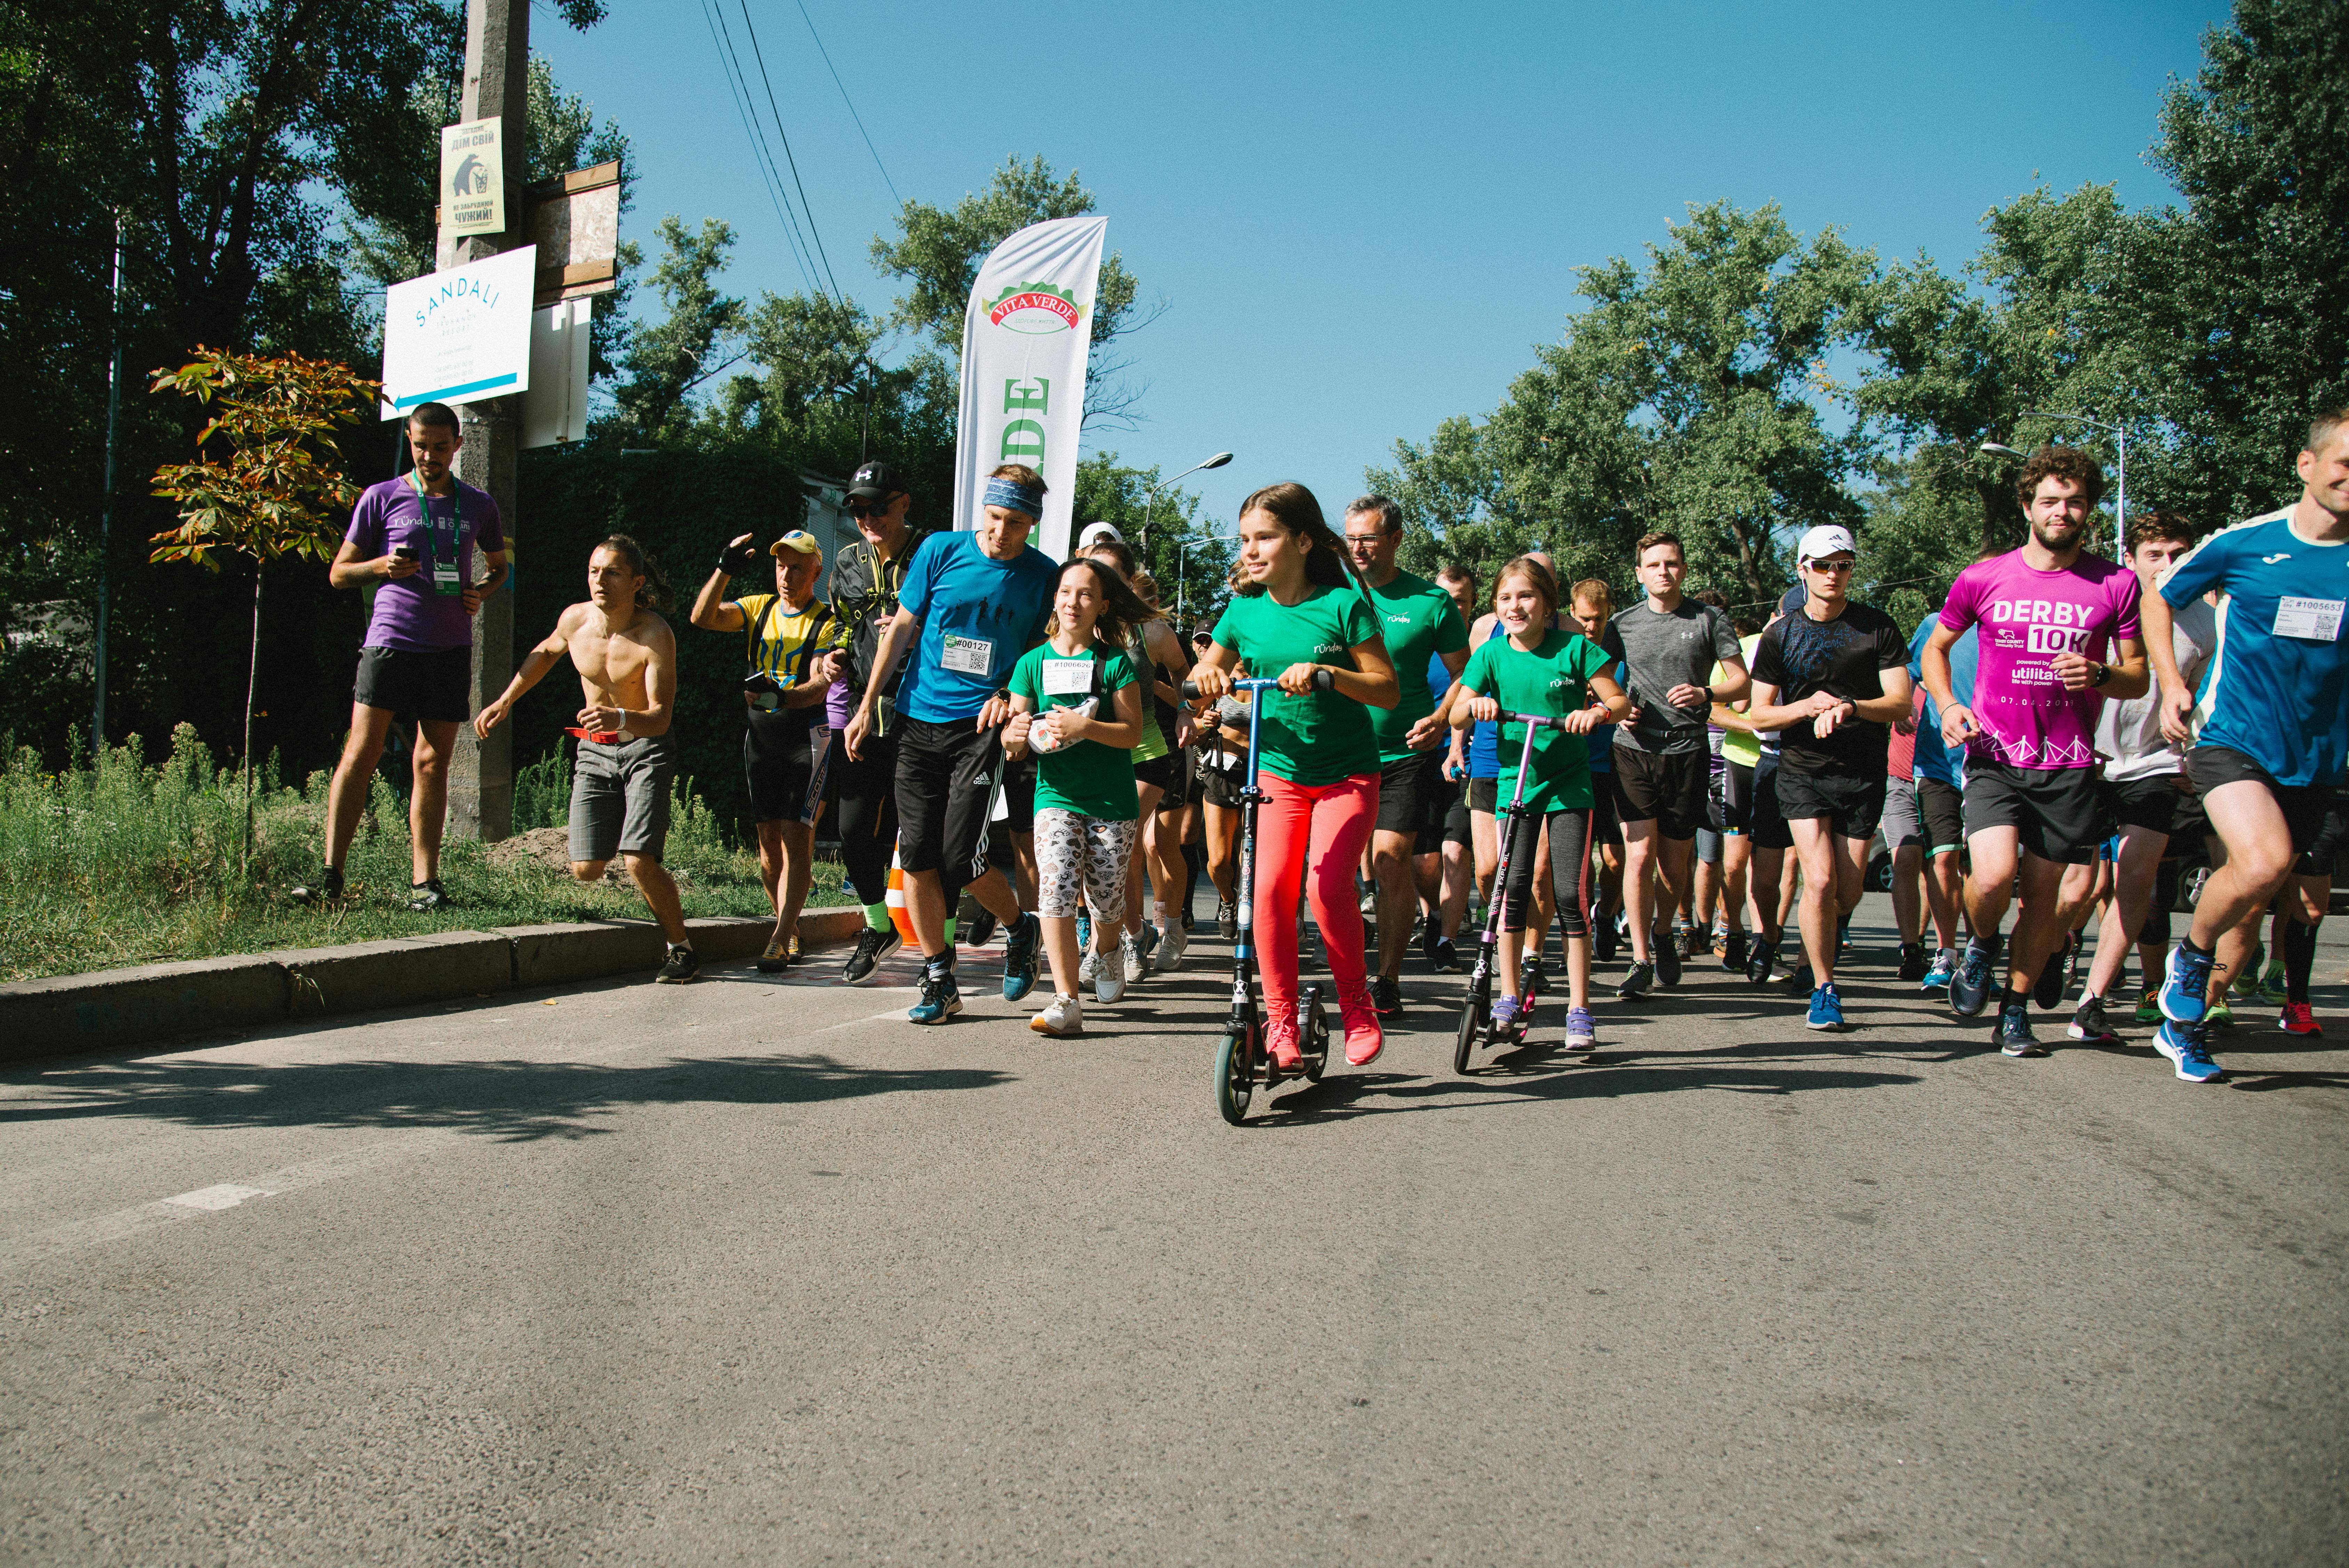 The picture shows the start of the weekly 5 km Runday race, participants are starting, in the foreground are teenage girls on scooters